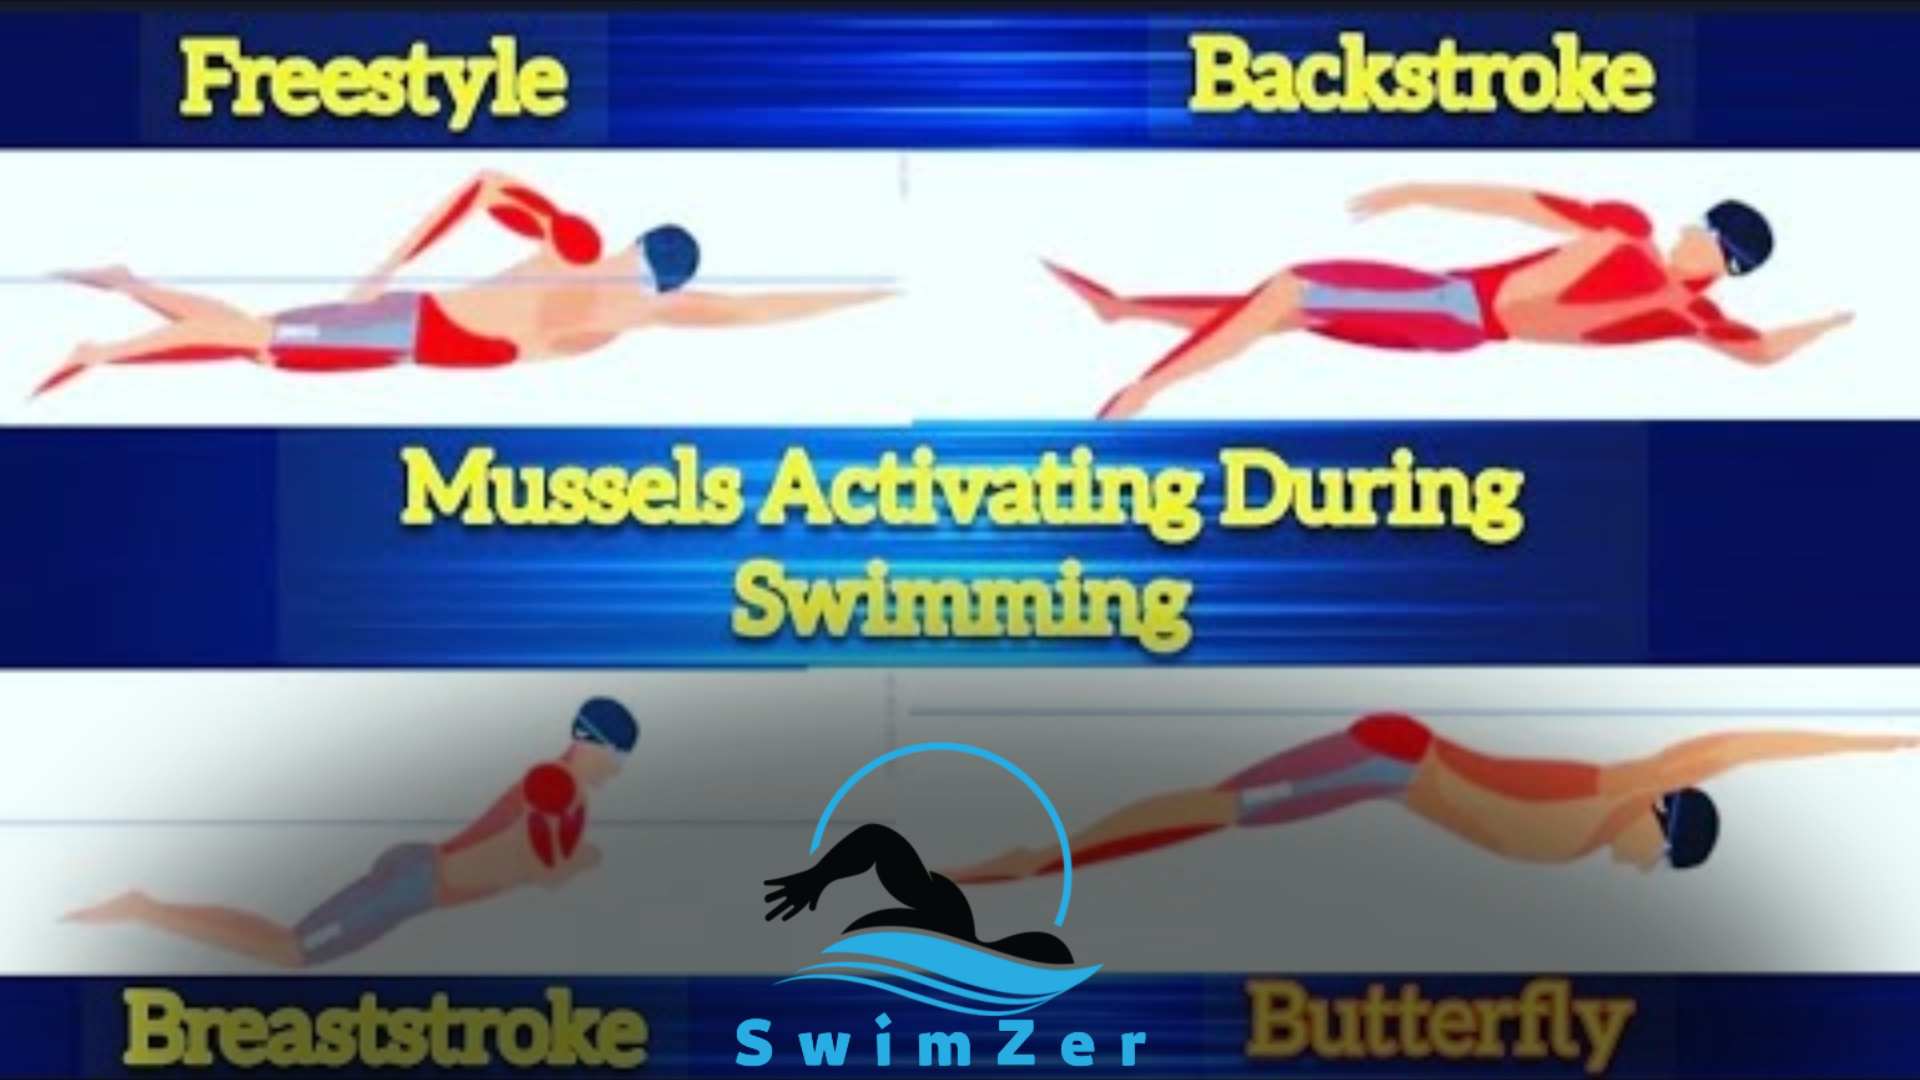 What Muscles Does Freestyle Swimming Work